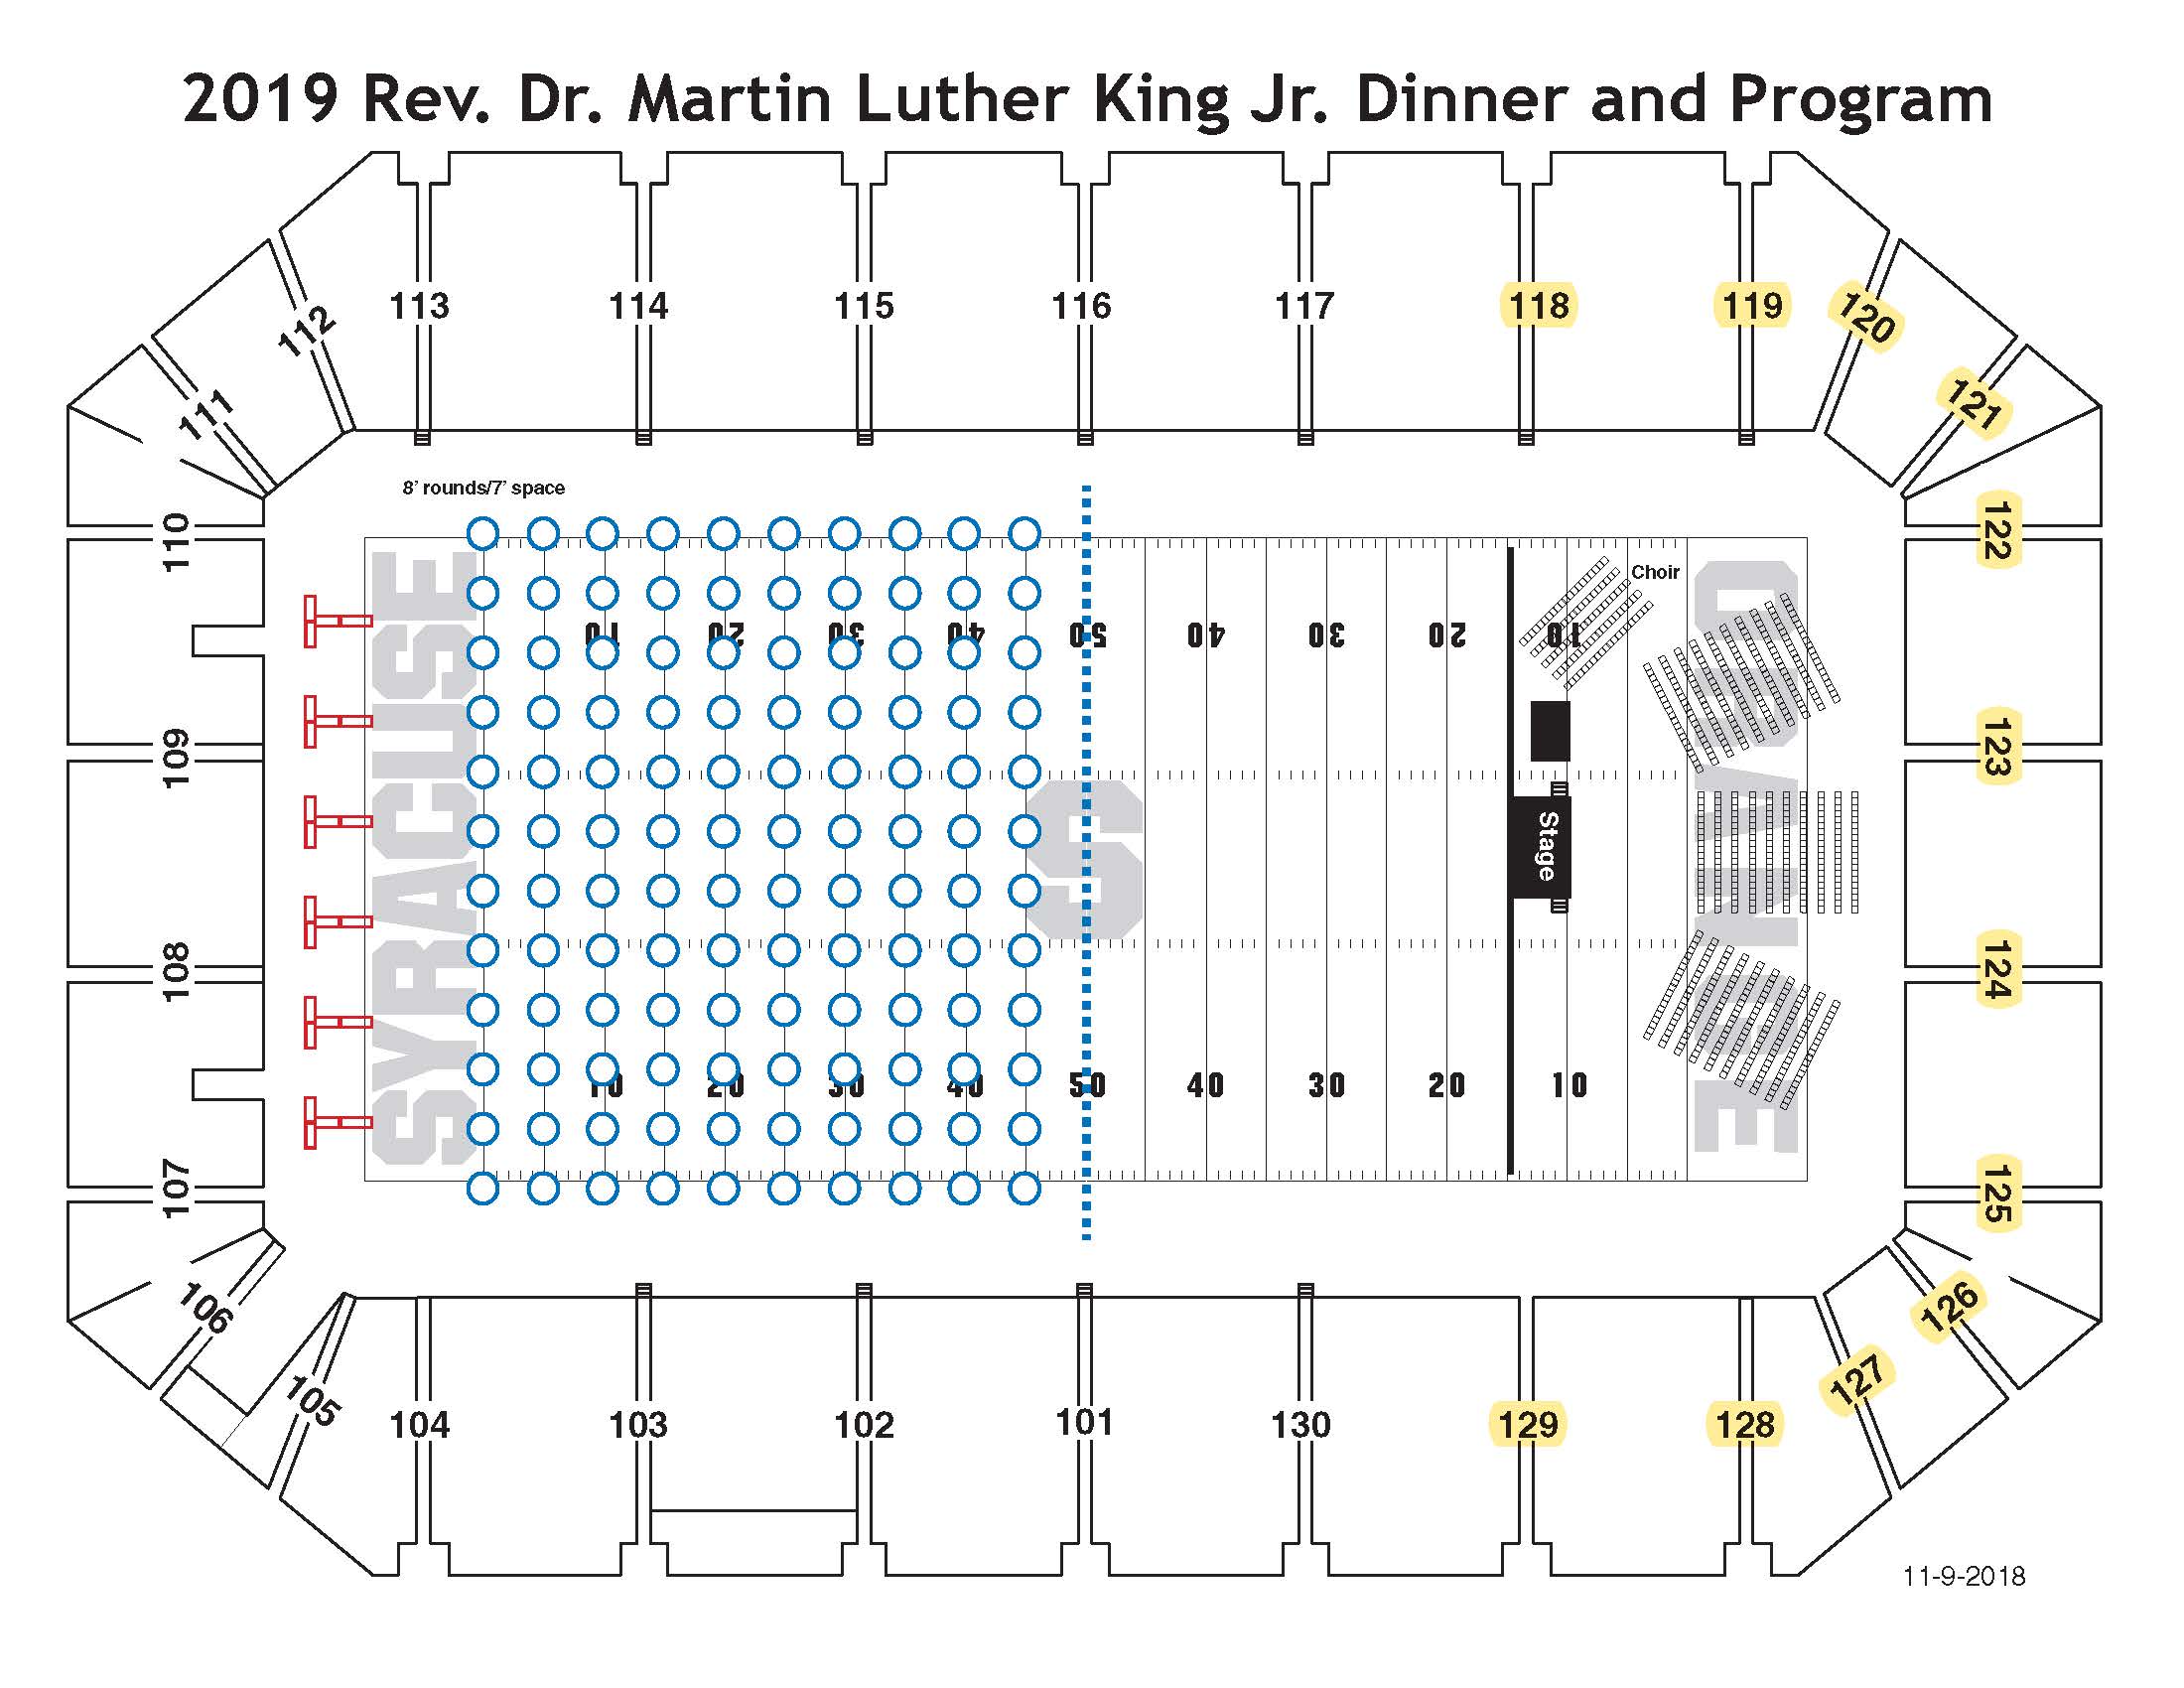 This diagram shows the event floor plan. The sections highlighted in yellow indicate where all attendees are seated for the main program. The blue circles indicate dinner tables. All dinner attendees will be moved to a reserved section for the main program following the conclusion of the dinner.